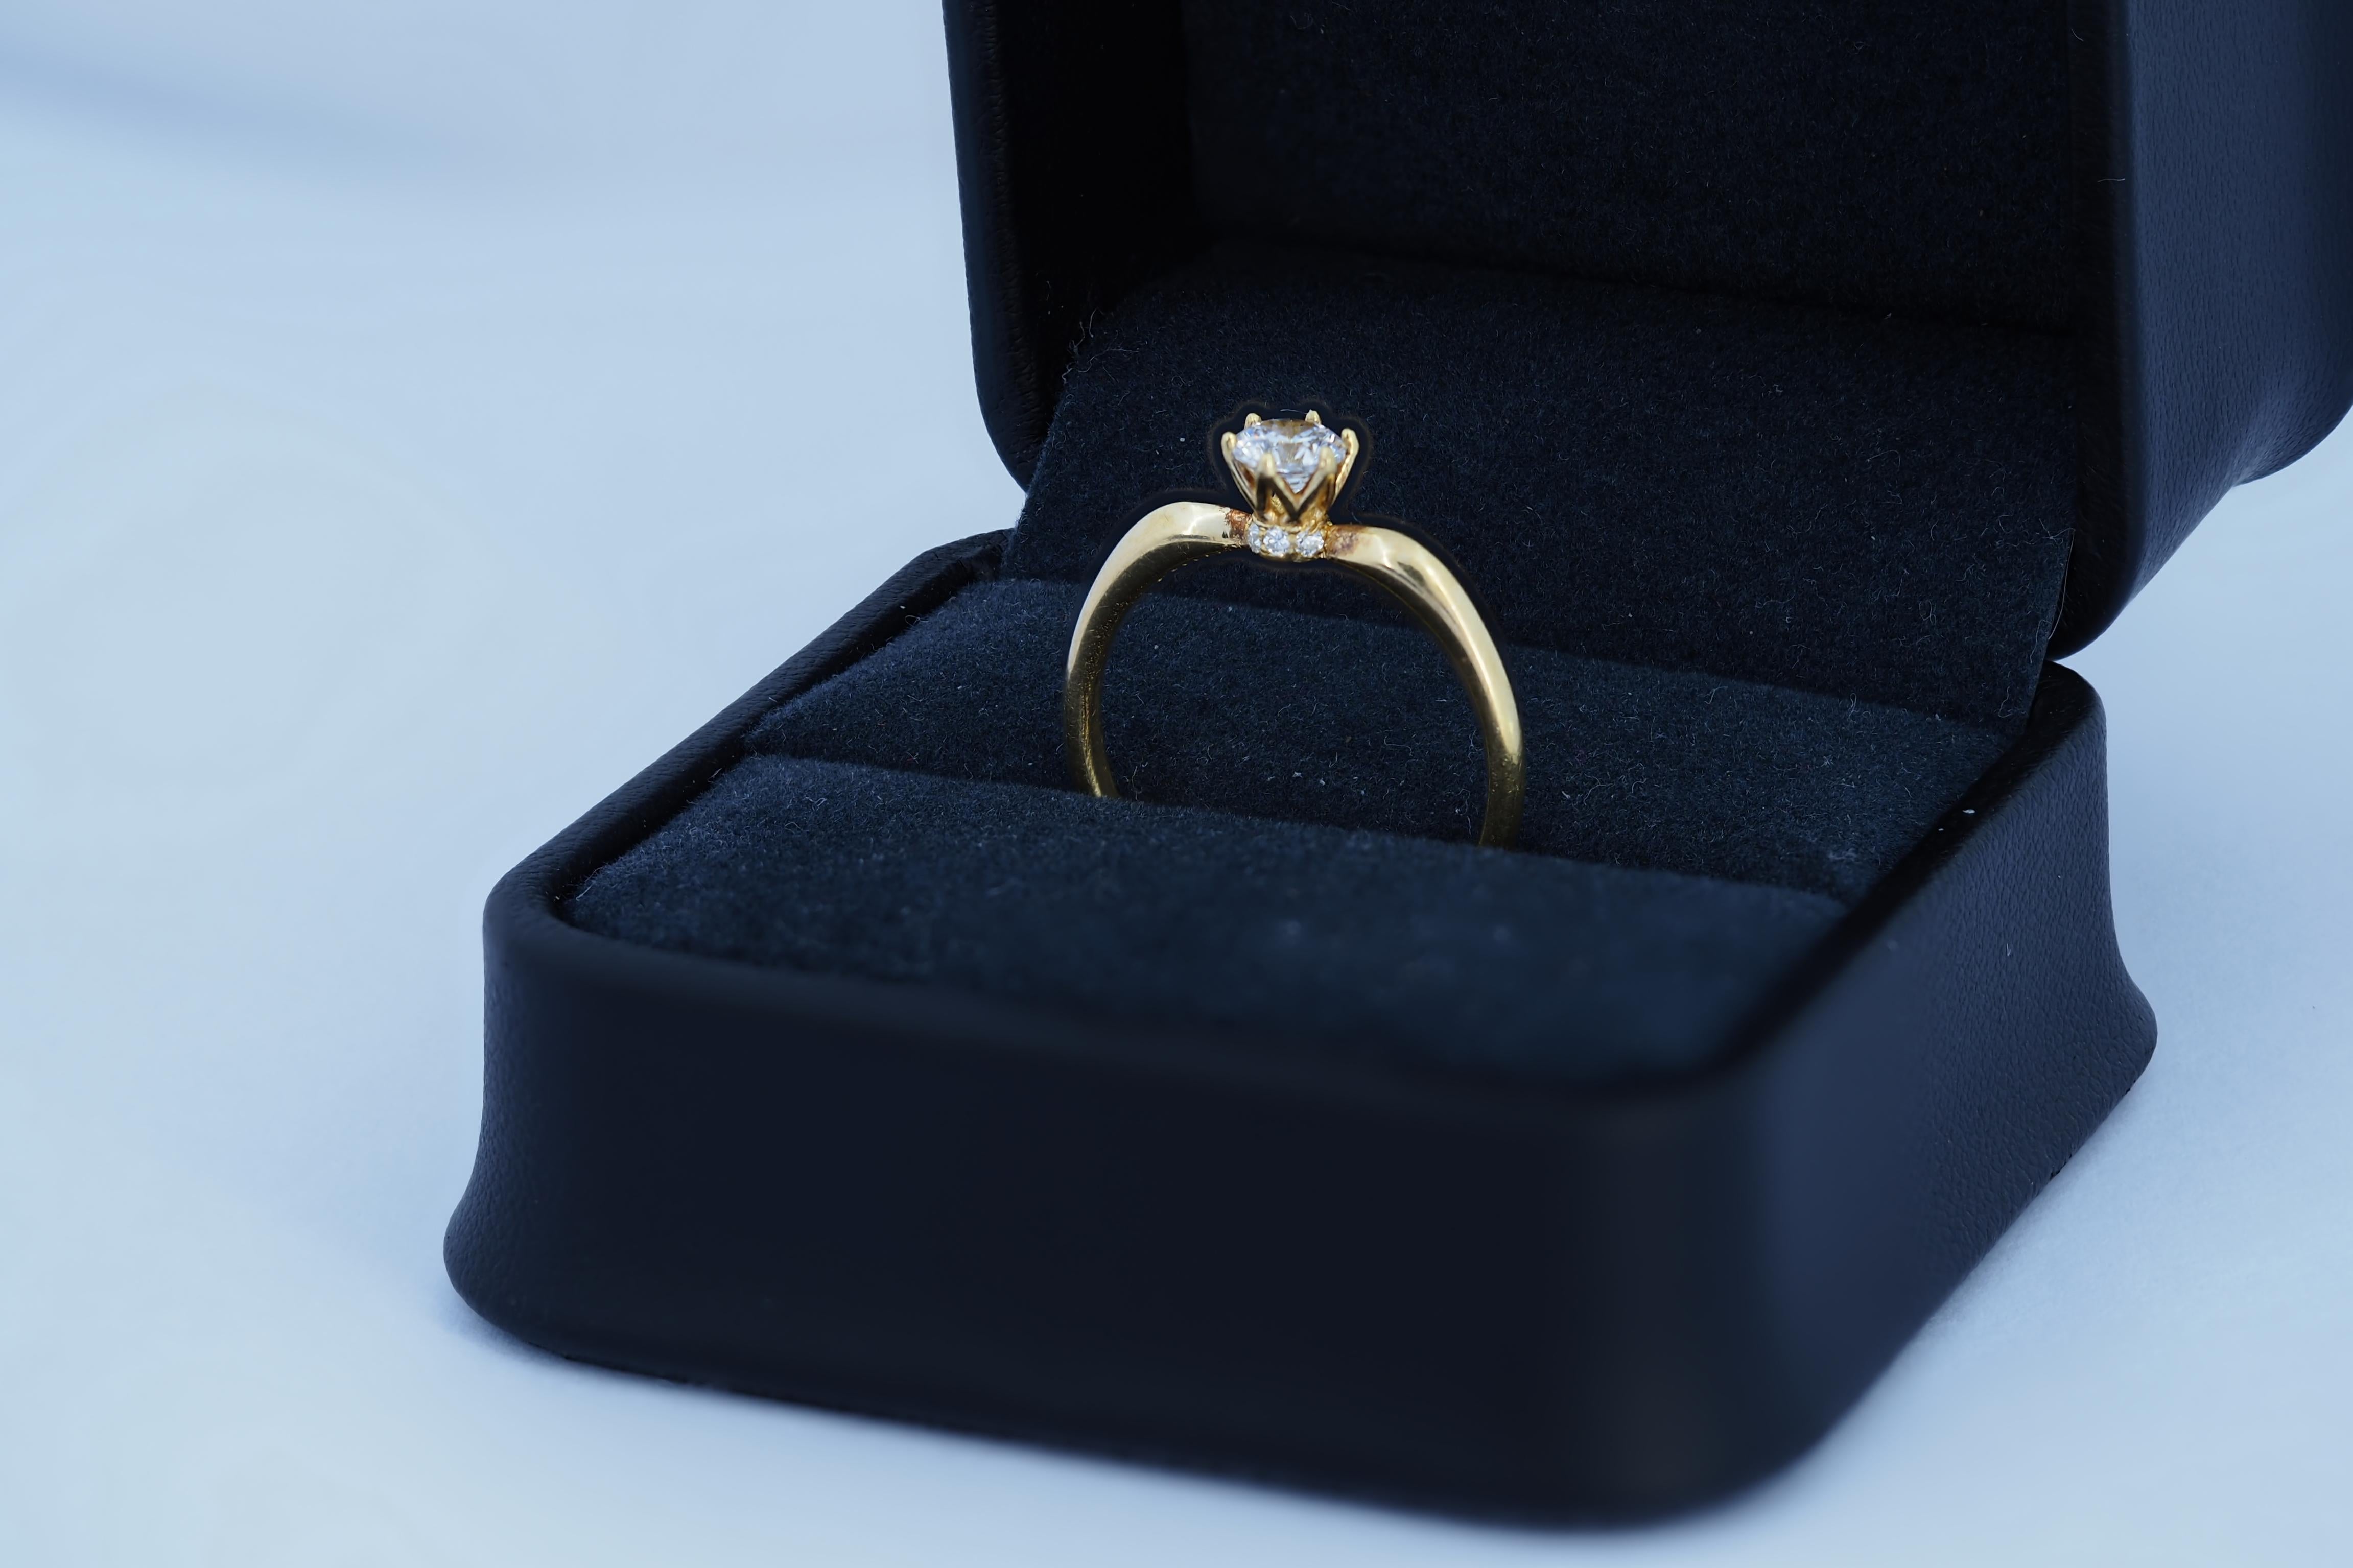 0.5 ct solitaire moissanite 14k gold ring. Six prong set round brilliant cut moissanite ring.  Classic moissanite engagement ring. Solitaire moissanite ring. Vintage style moissanite ring. 

Metal: 14k gold
Weight: 2 gr depends from size
Moissanite: